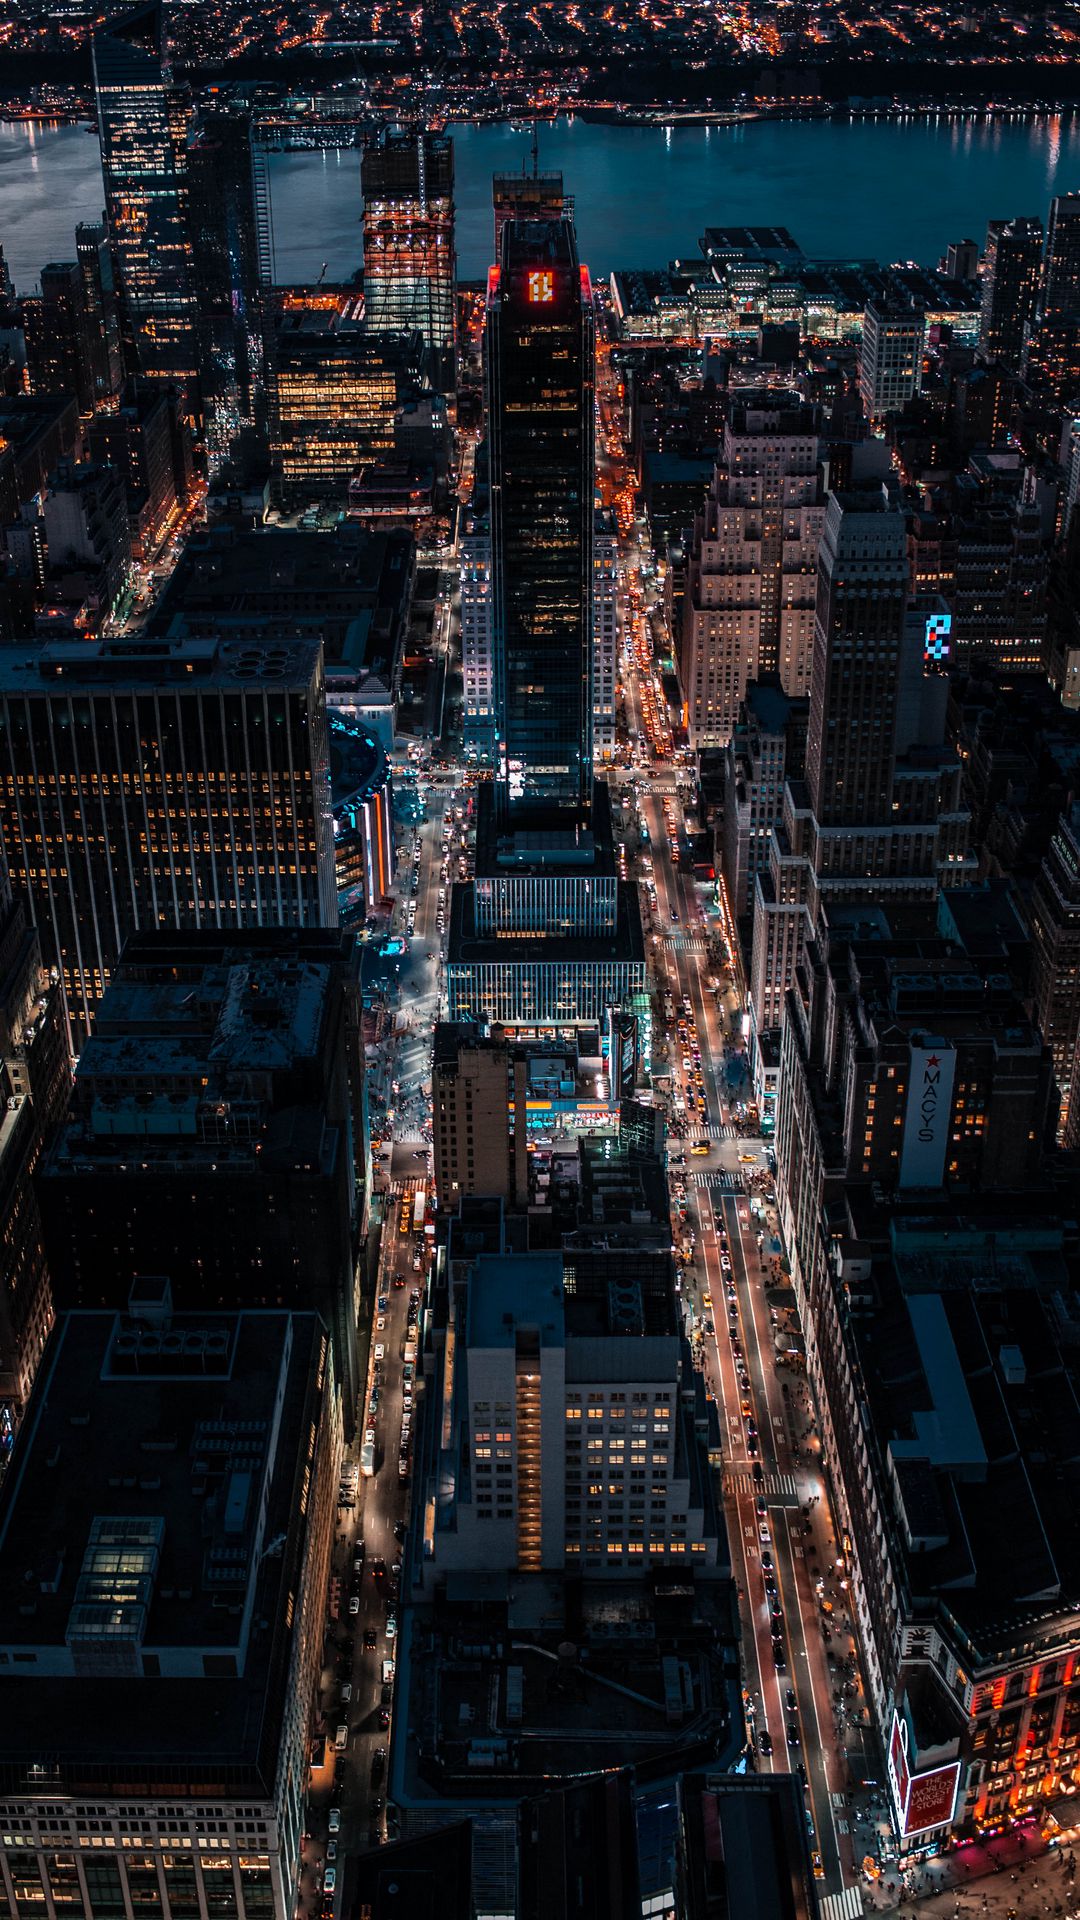 Download wallpaper 1080x1920 night city, aerial view, skyscrapers, city ...